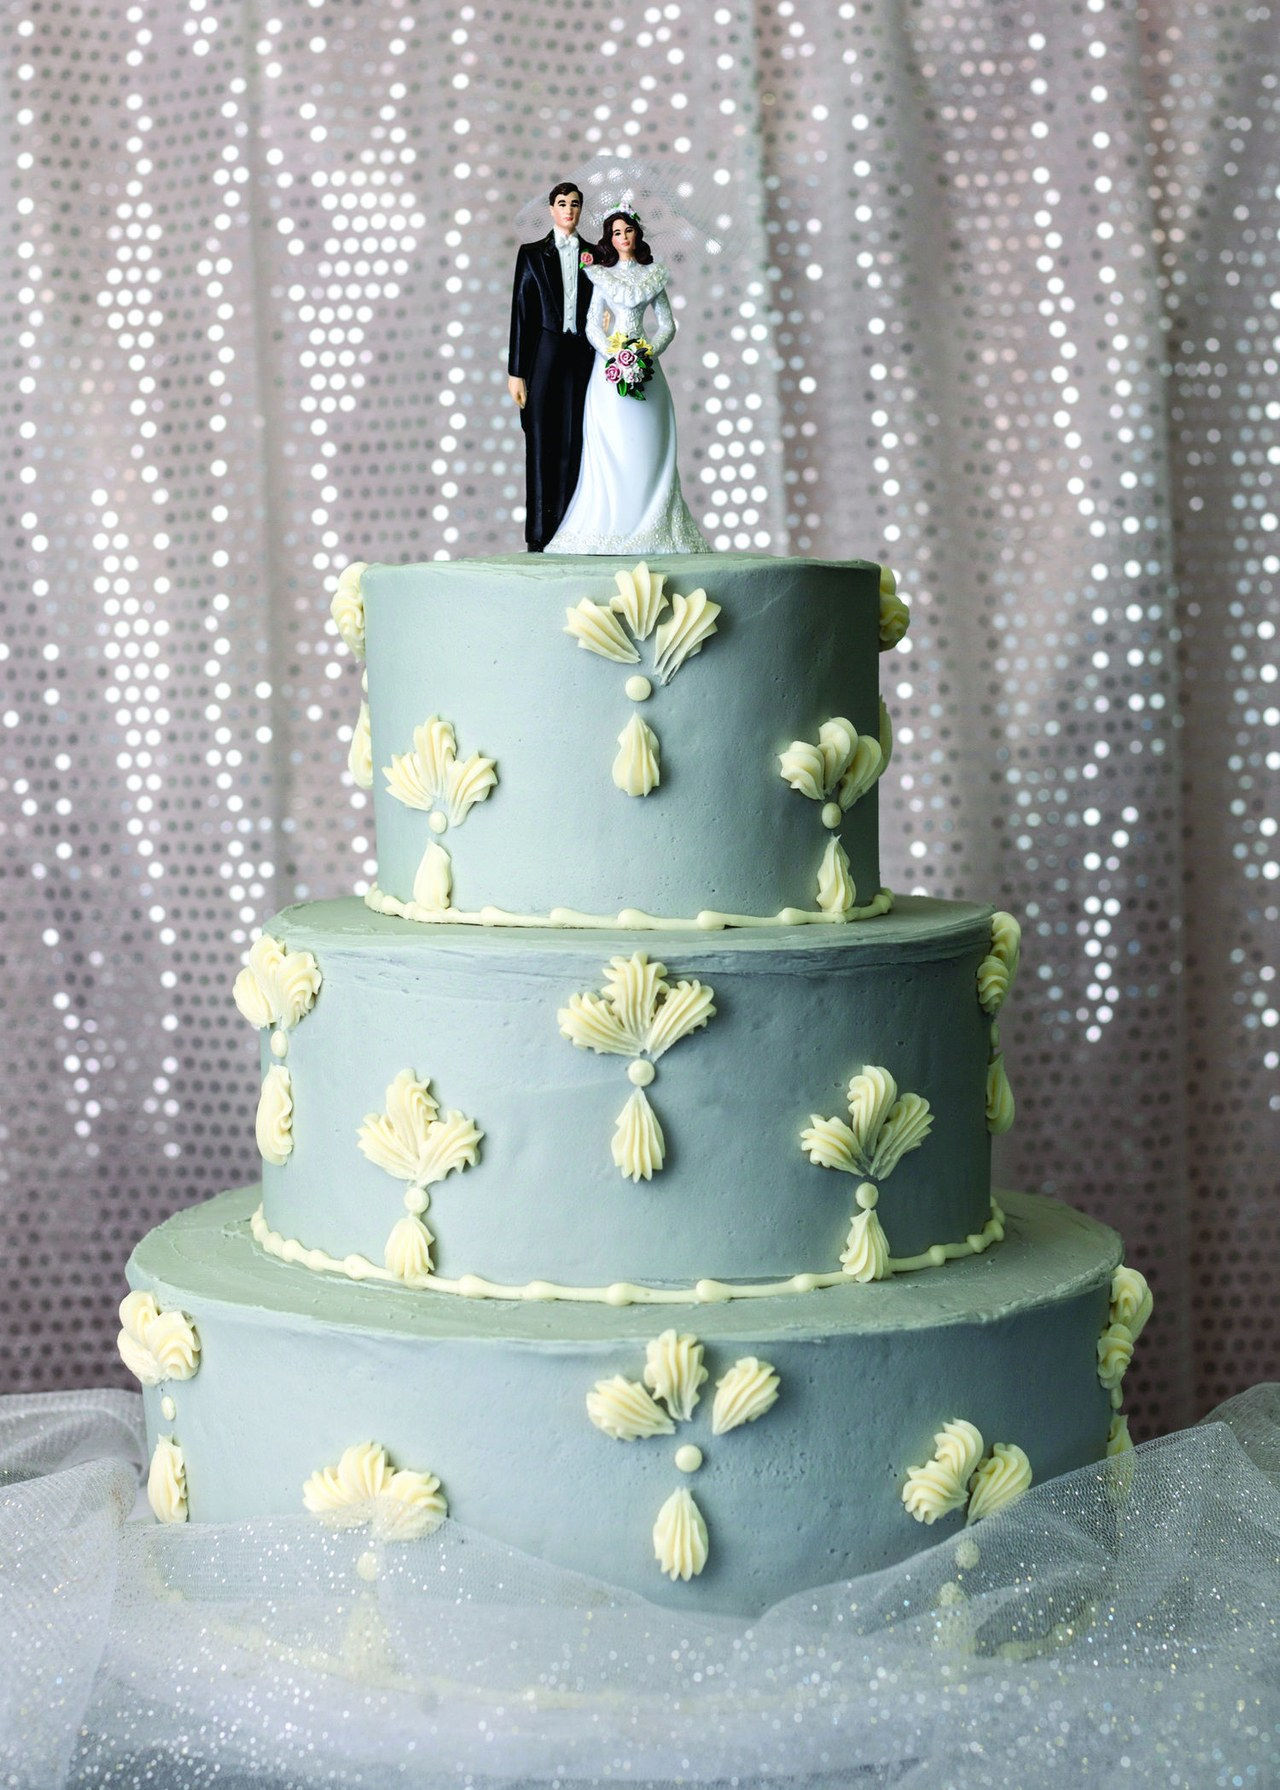 16 pictures of wedding cakes magnolia bakery 0328